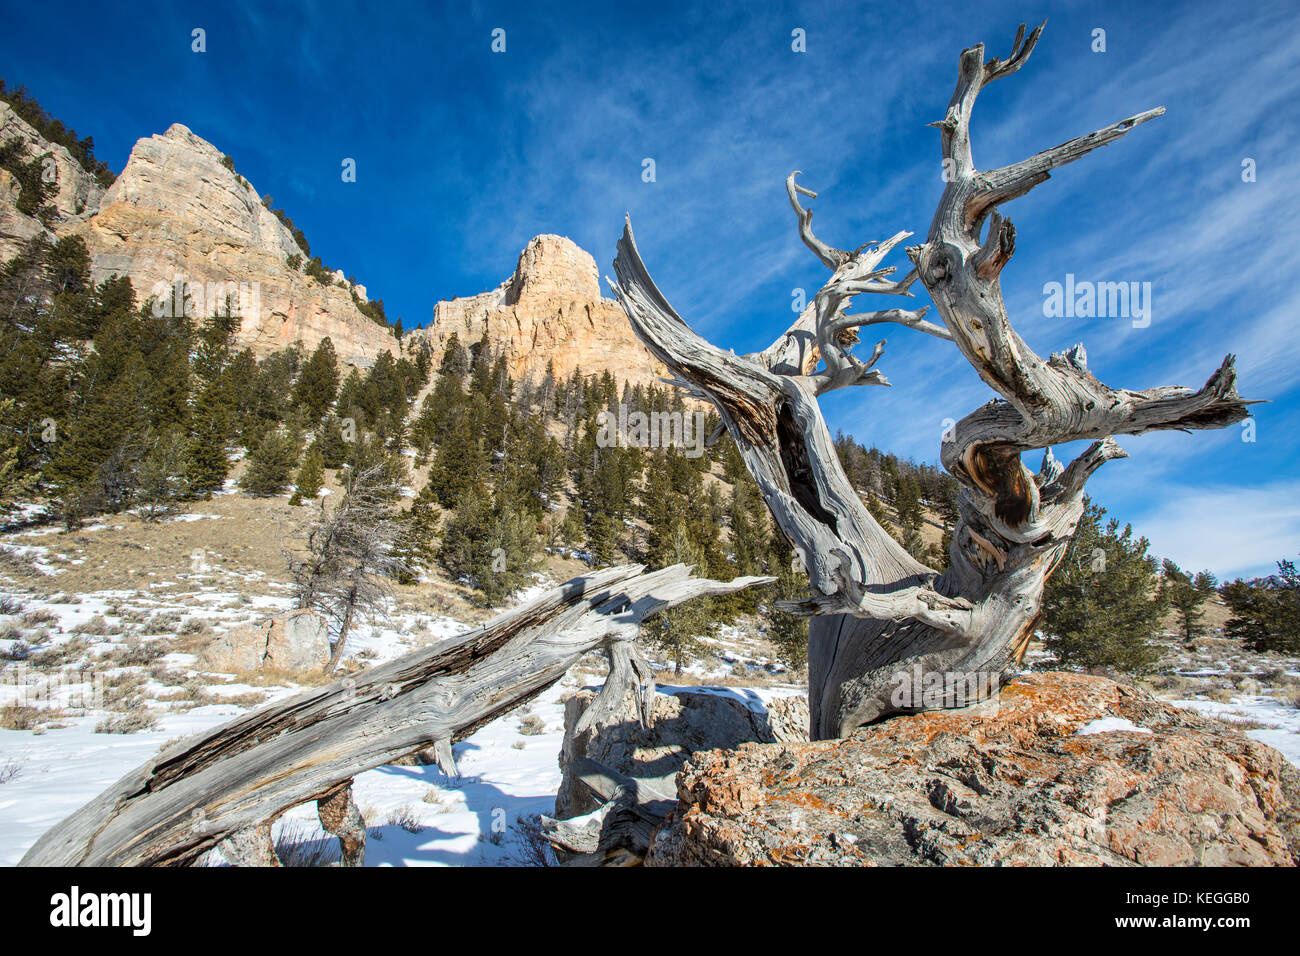 Winter in the Sunlight Basin of the Shoshone National Forest Wyoming Stock Photo